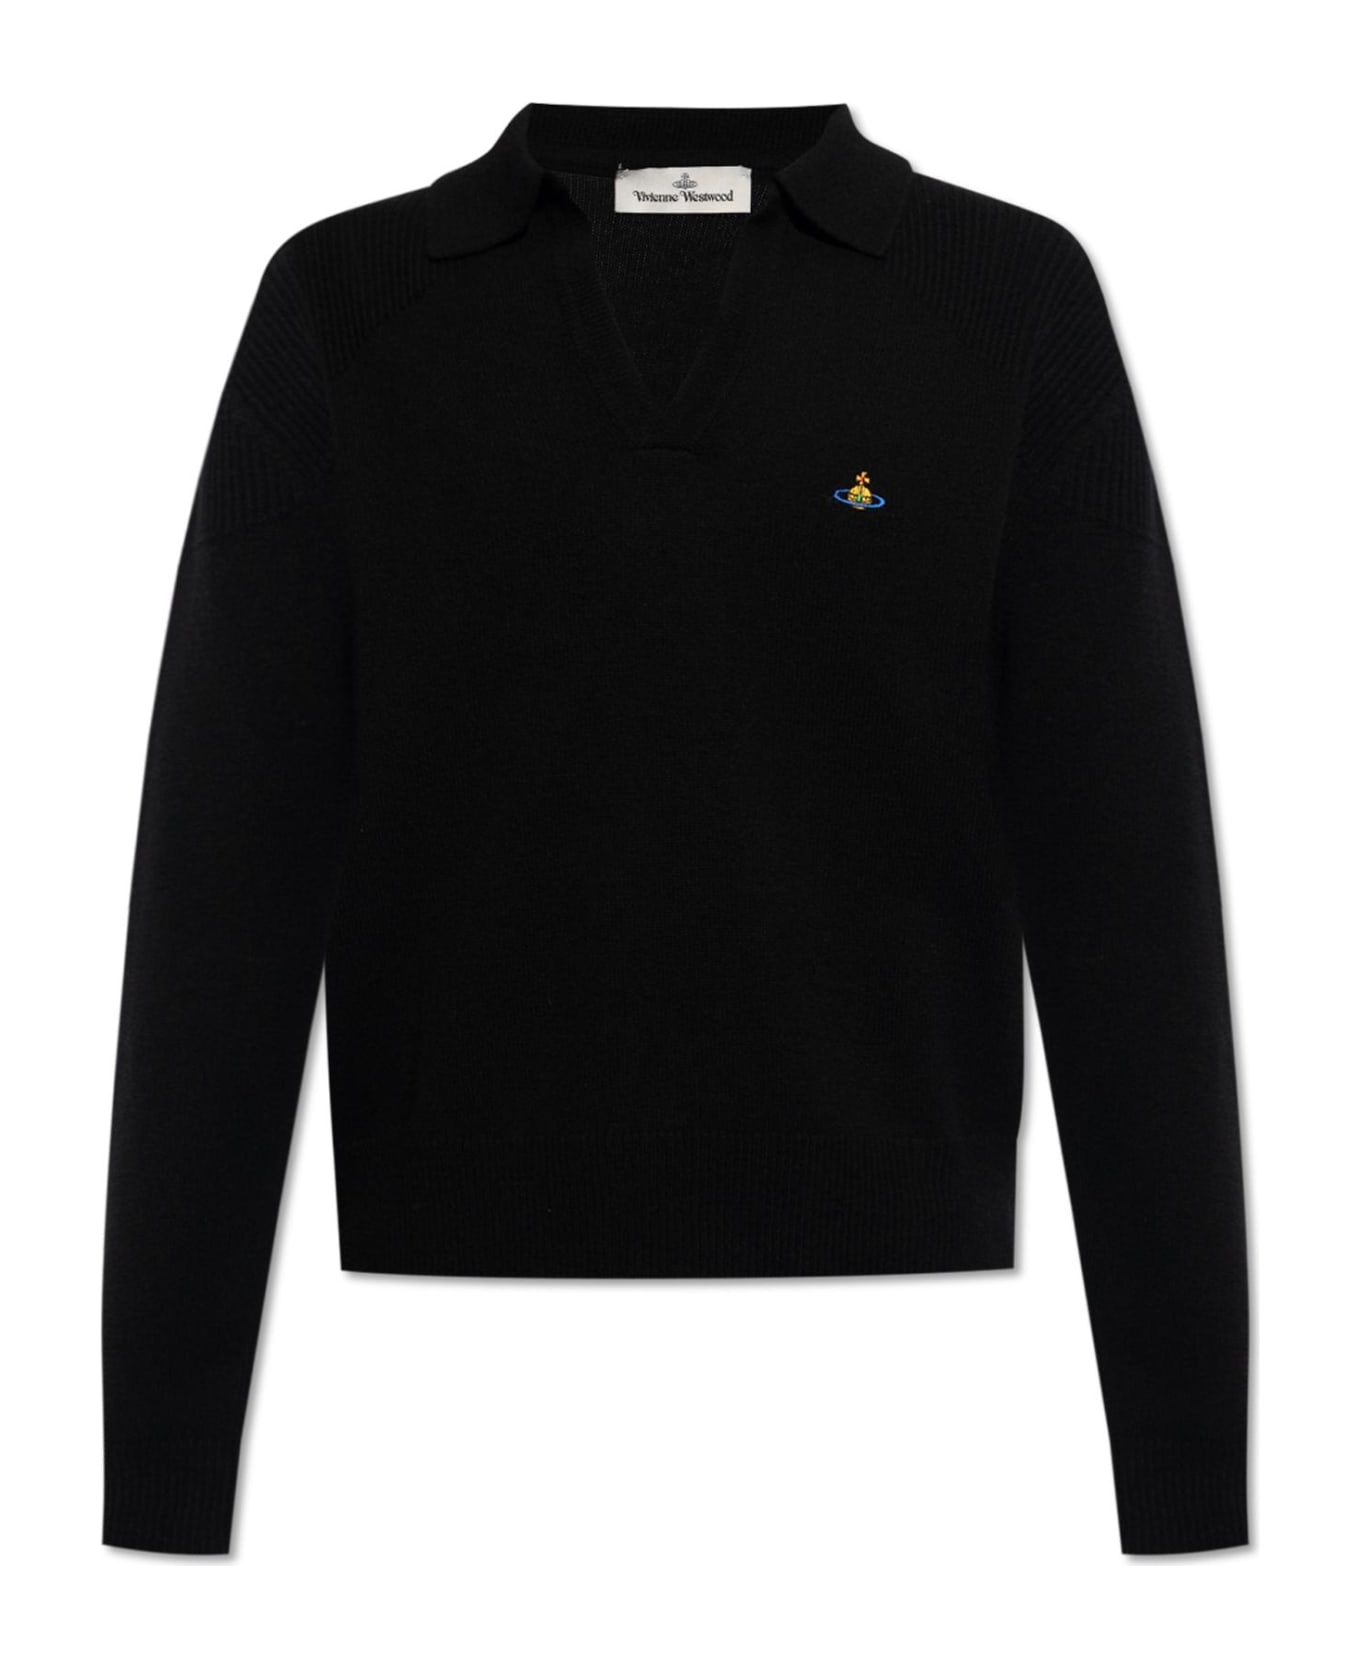 Vivienne Westwood 'football' Wool Sweater With Collar - BLACK ニットウェア